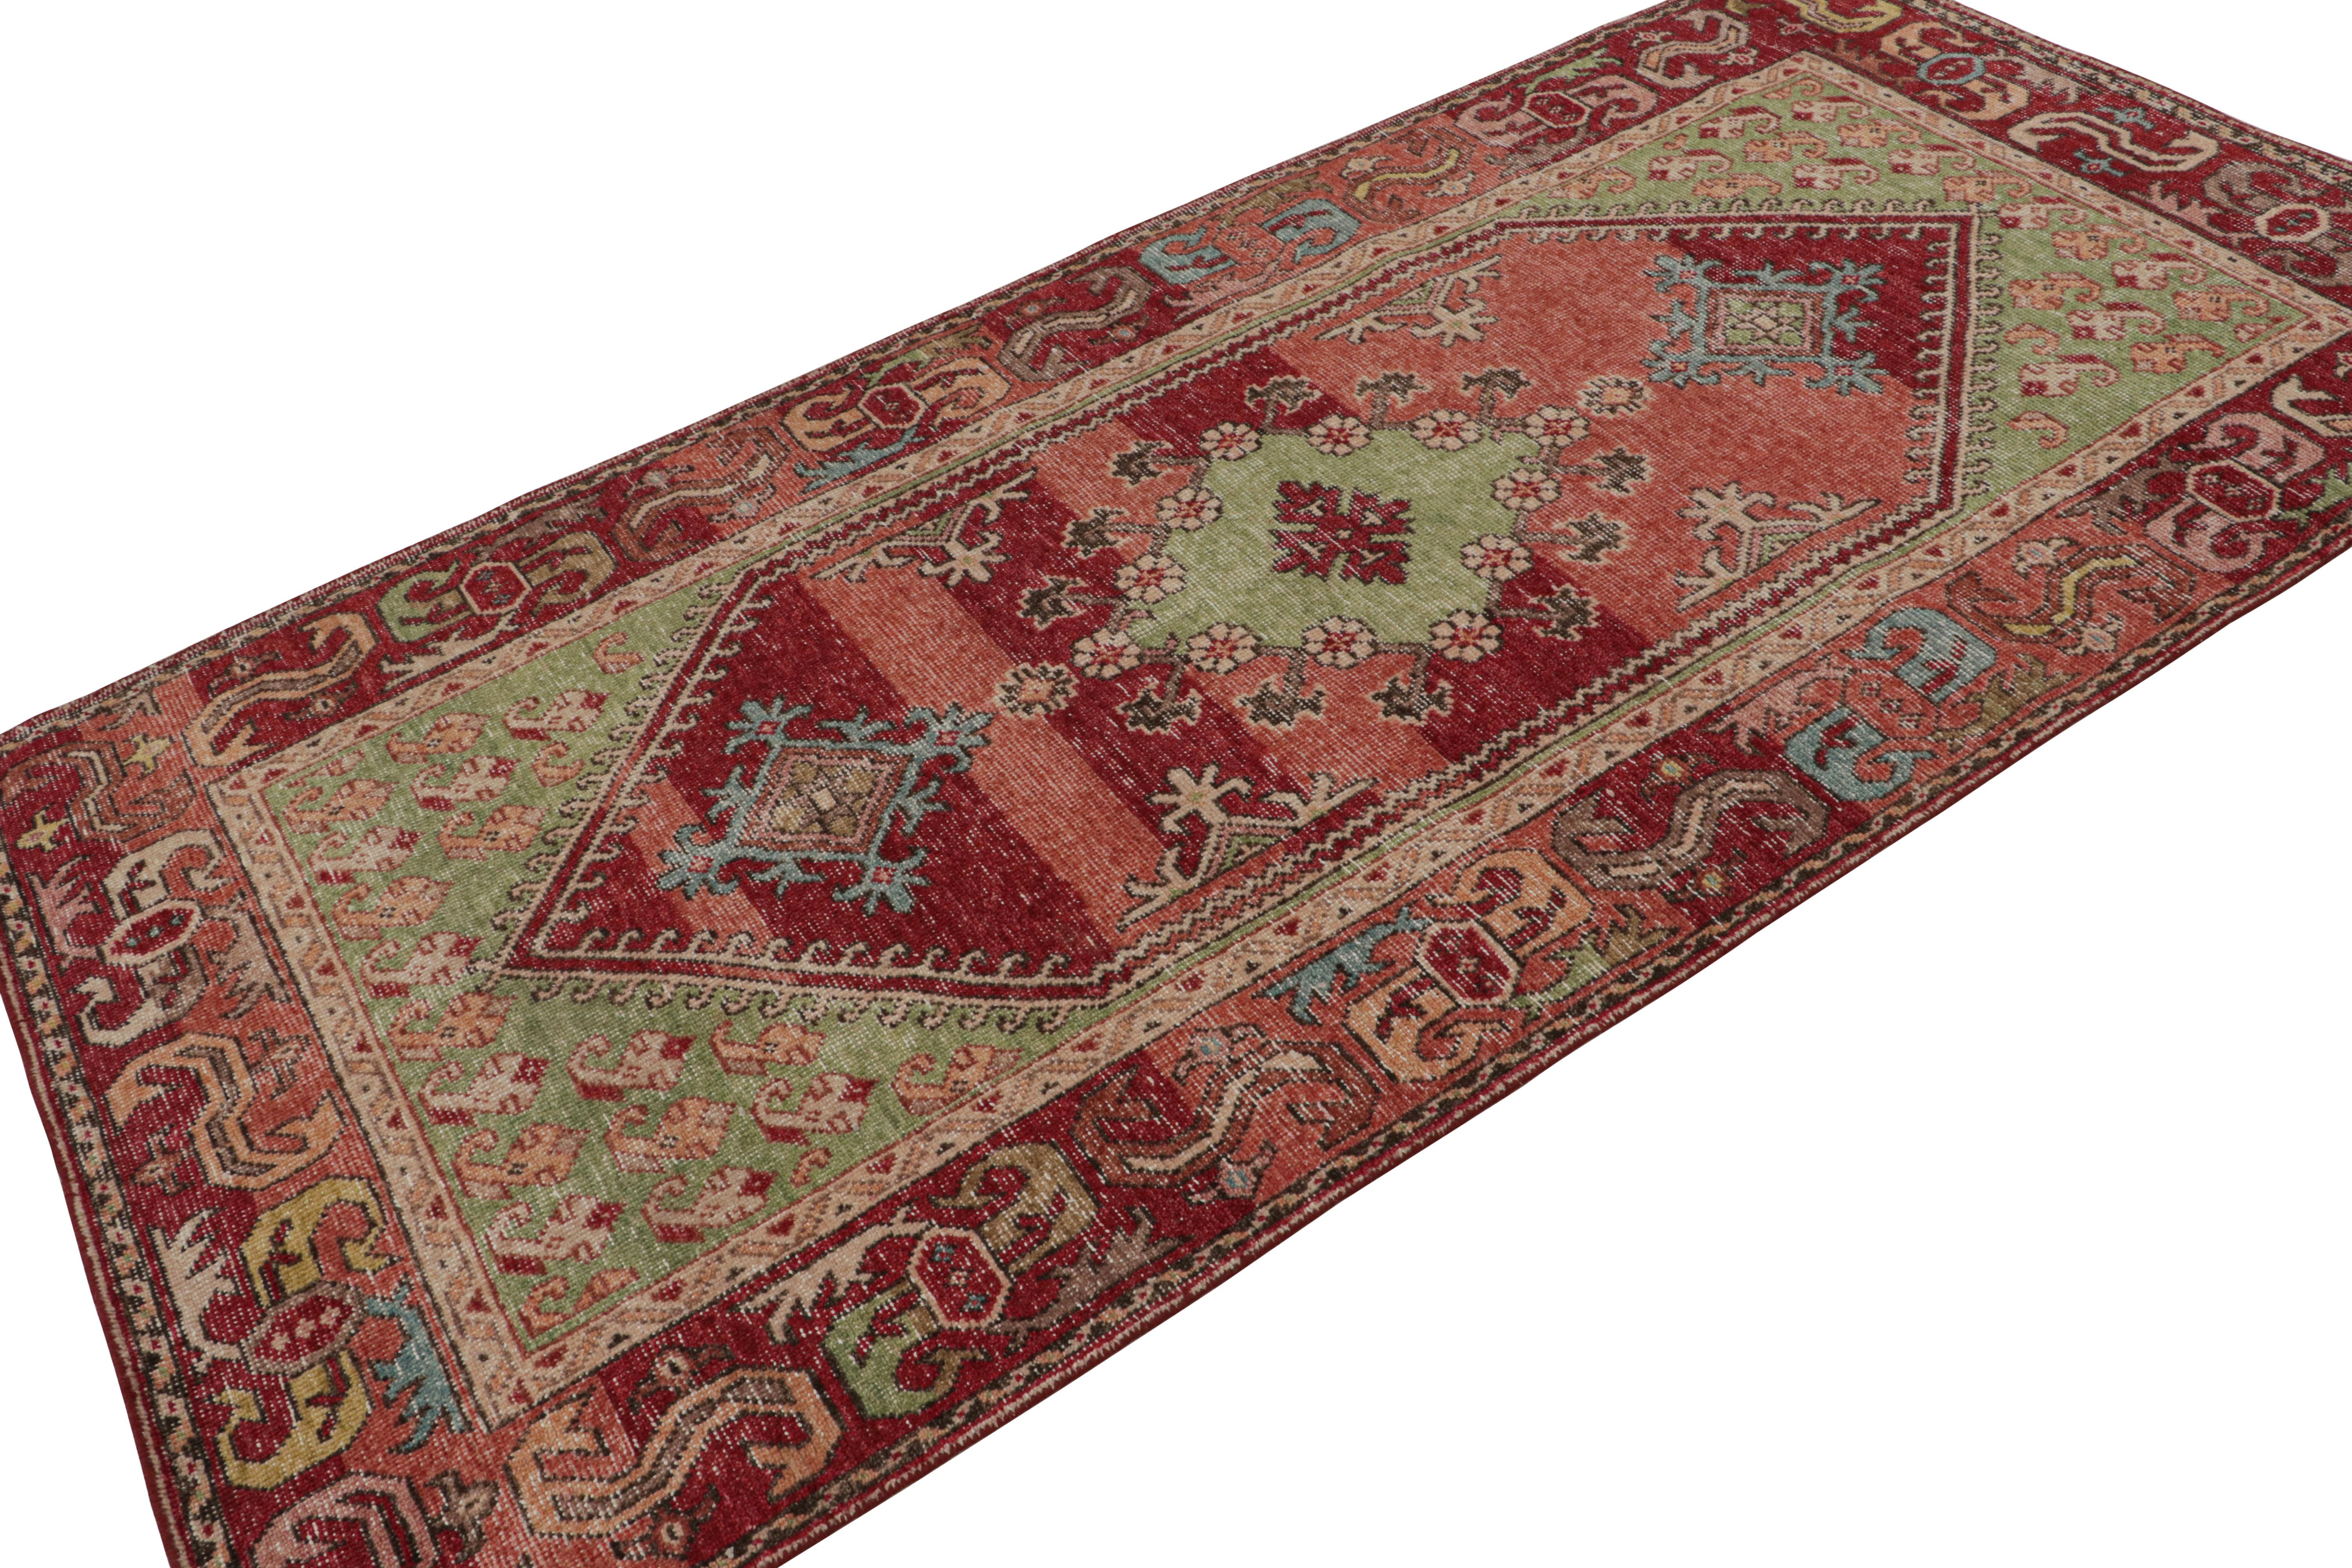 Hand-knotted in wool, this 4x8 contemporary rug as inspired by antique Oriental rugs and particularly Turkish tribal sensibilities, is a new addition to the Homage collection. 

On the Design: 

Hand knotted in wool, this piece enjoys burgundy and